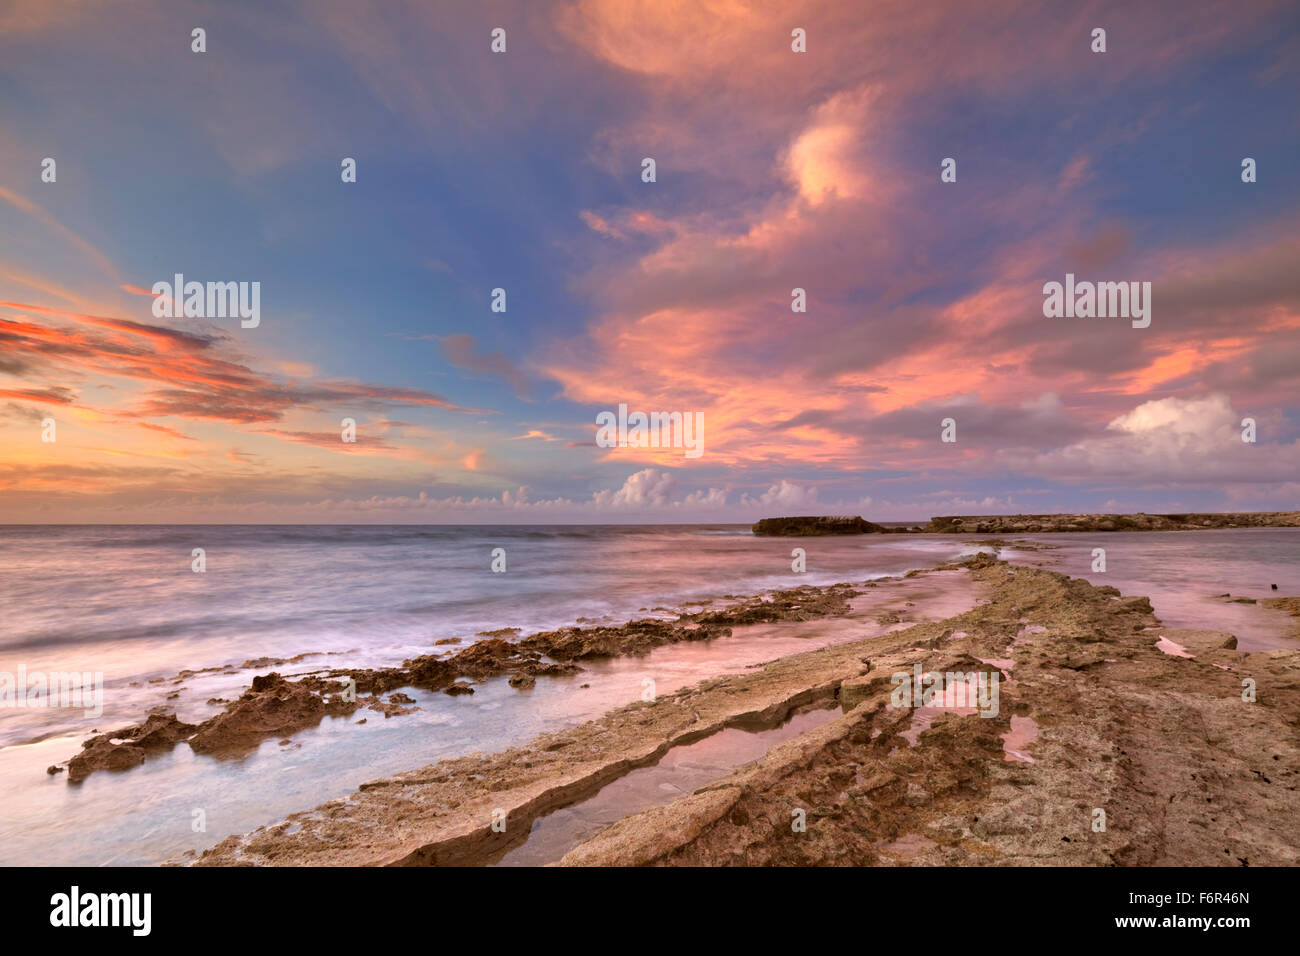 A rocky tropical coast at sunset. Photographed at Playa Canoa on Curaçao, The Netherlands Antilles. Stock Photo